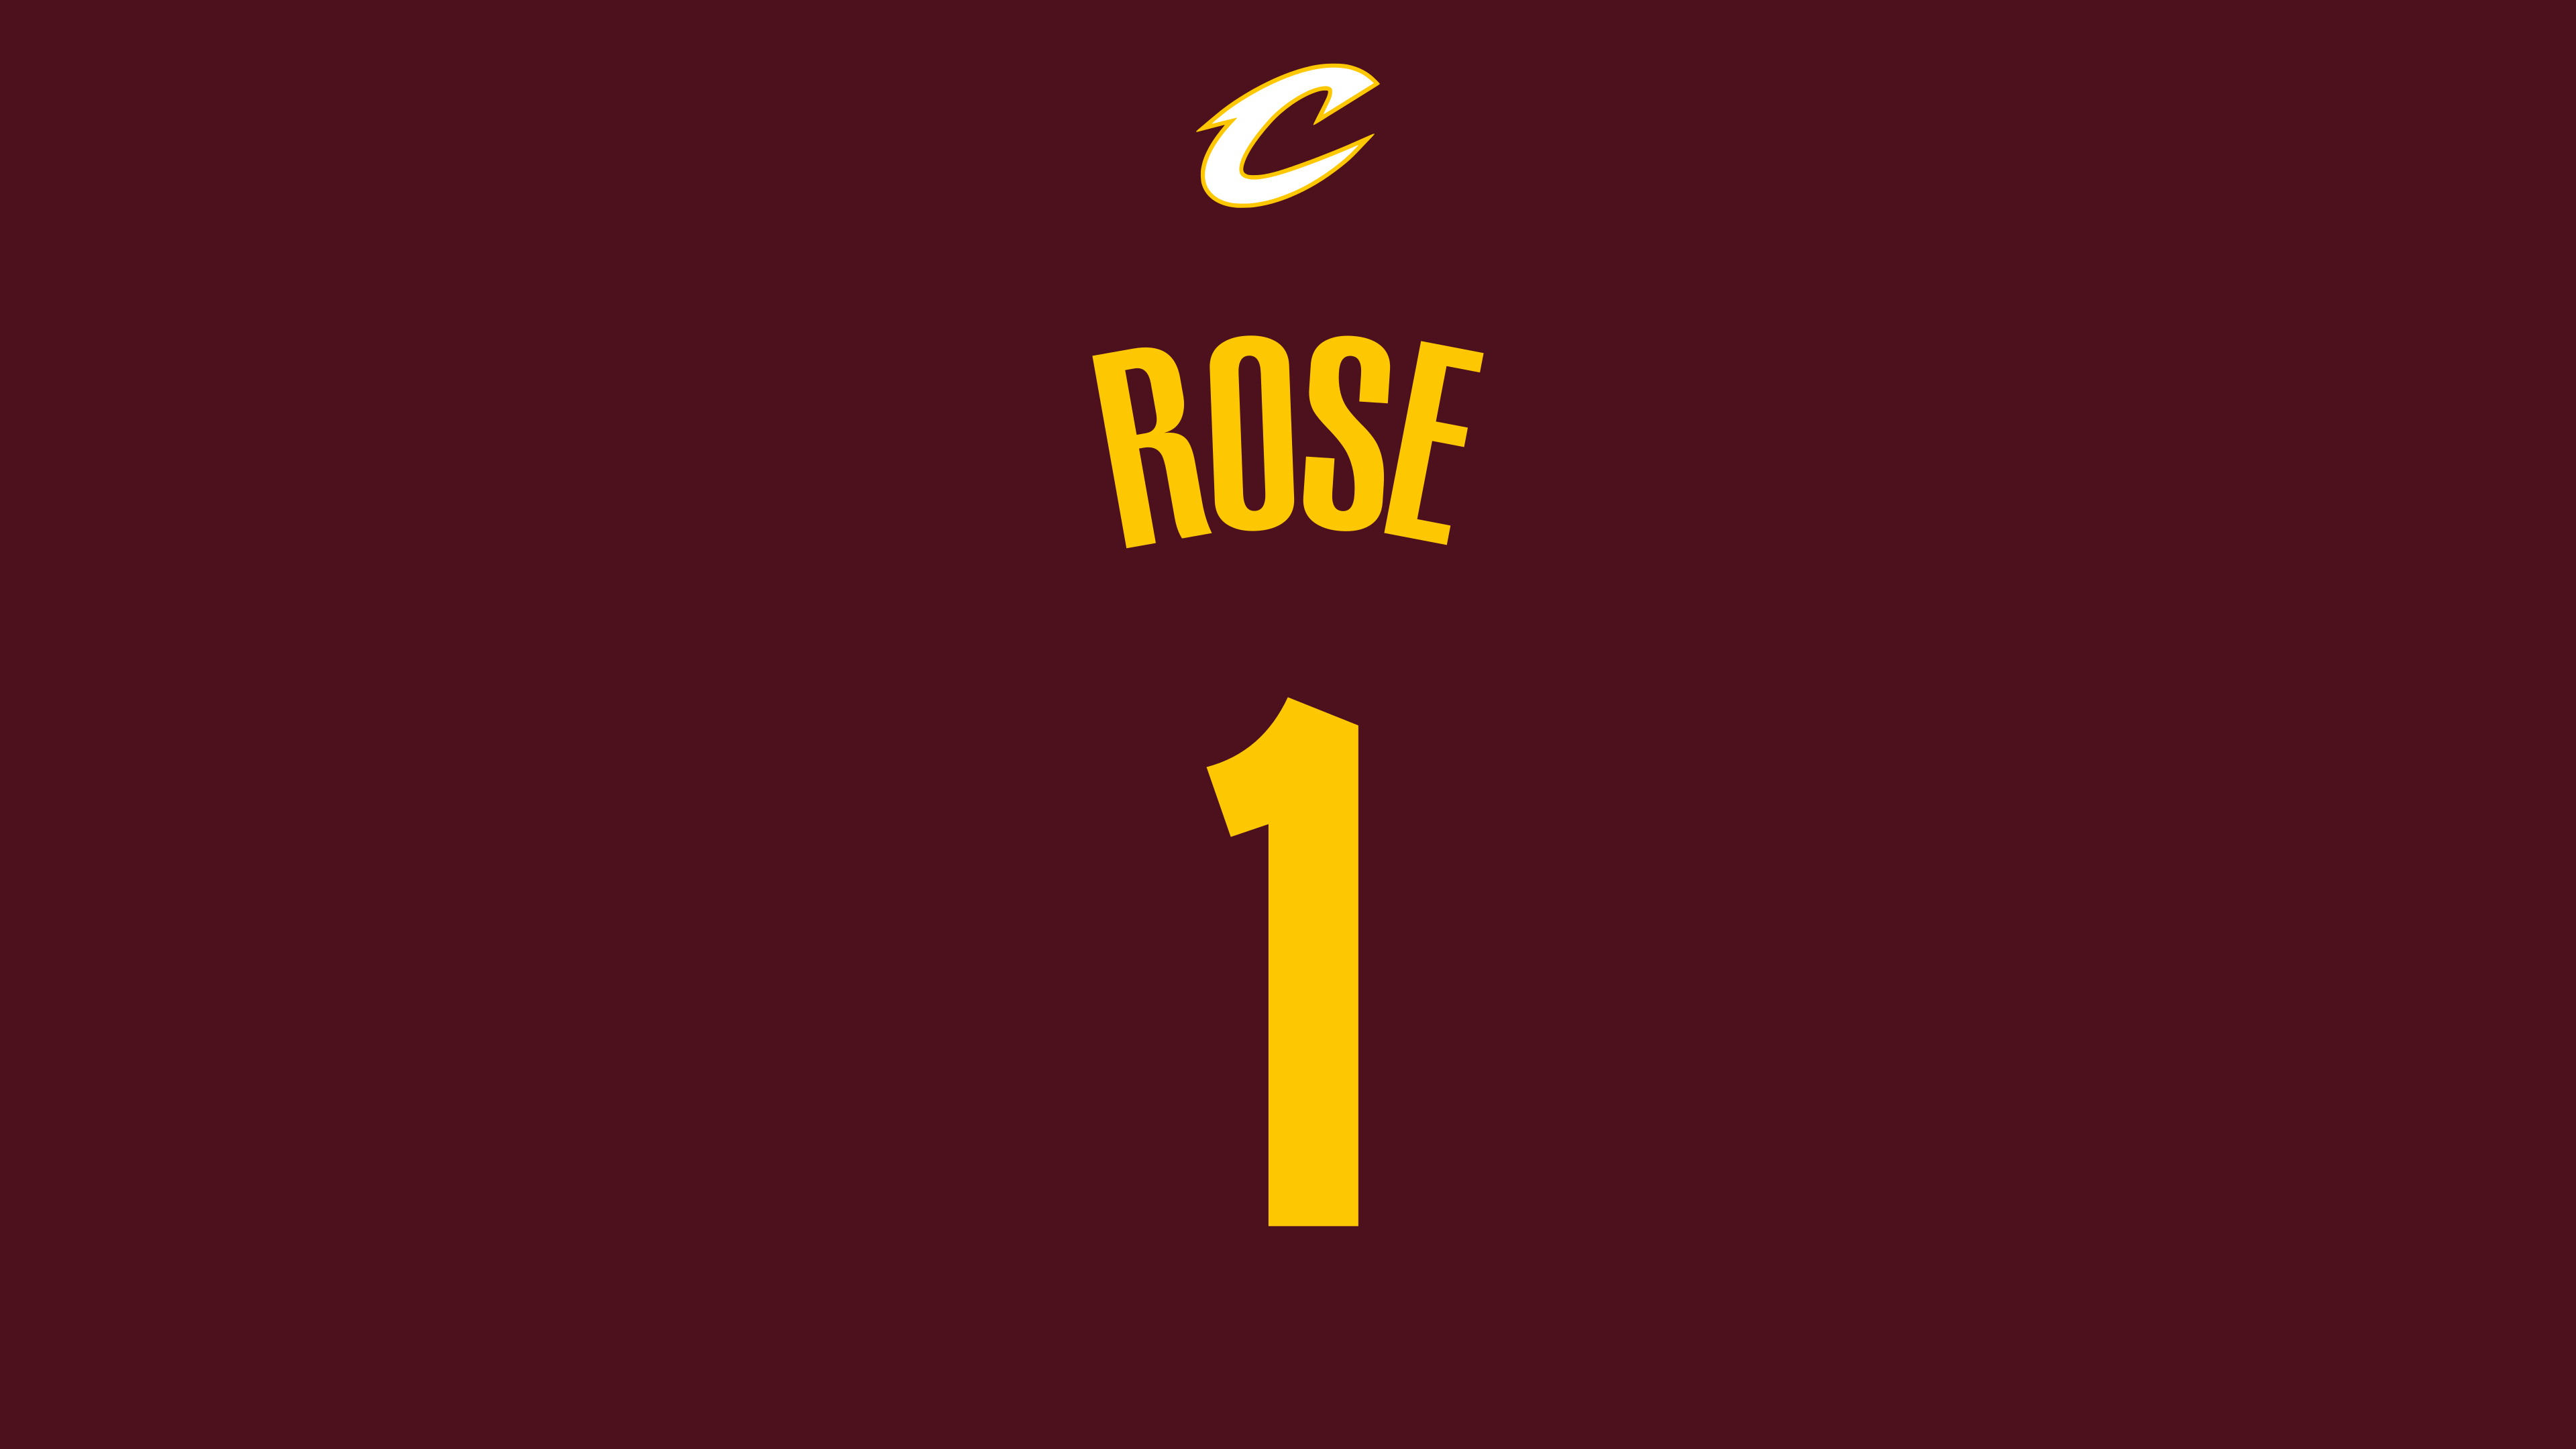 Cleveland Cavaliers on X: 🚨 NEW WALLPAPER 🚨 #OneForTheLand